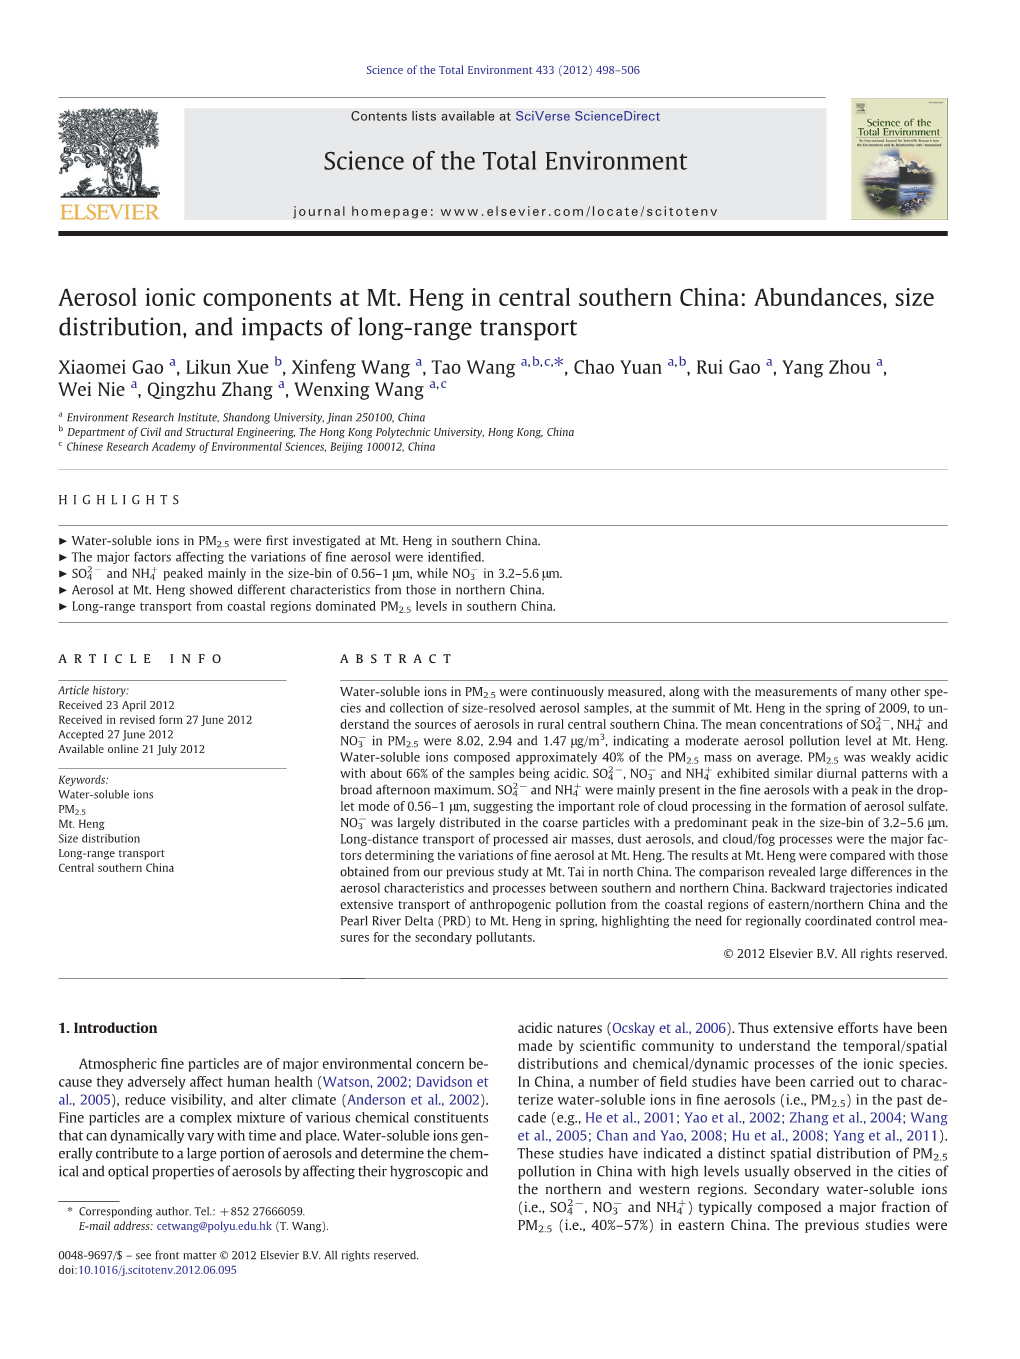 Aerosol Ionic Components at Mt. Heng in Central Southern China: Abundances, Size Distribution, and Impacts of Long-Range Transport